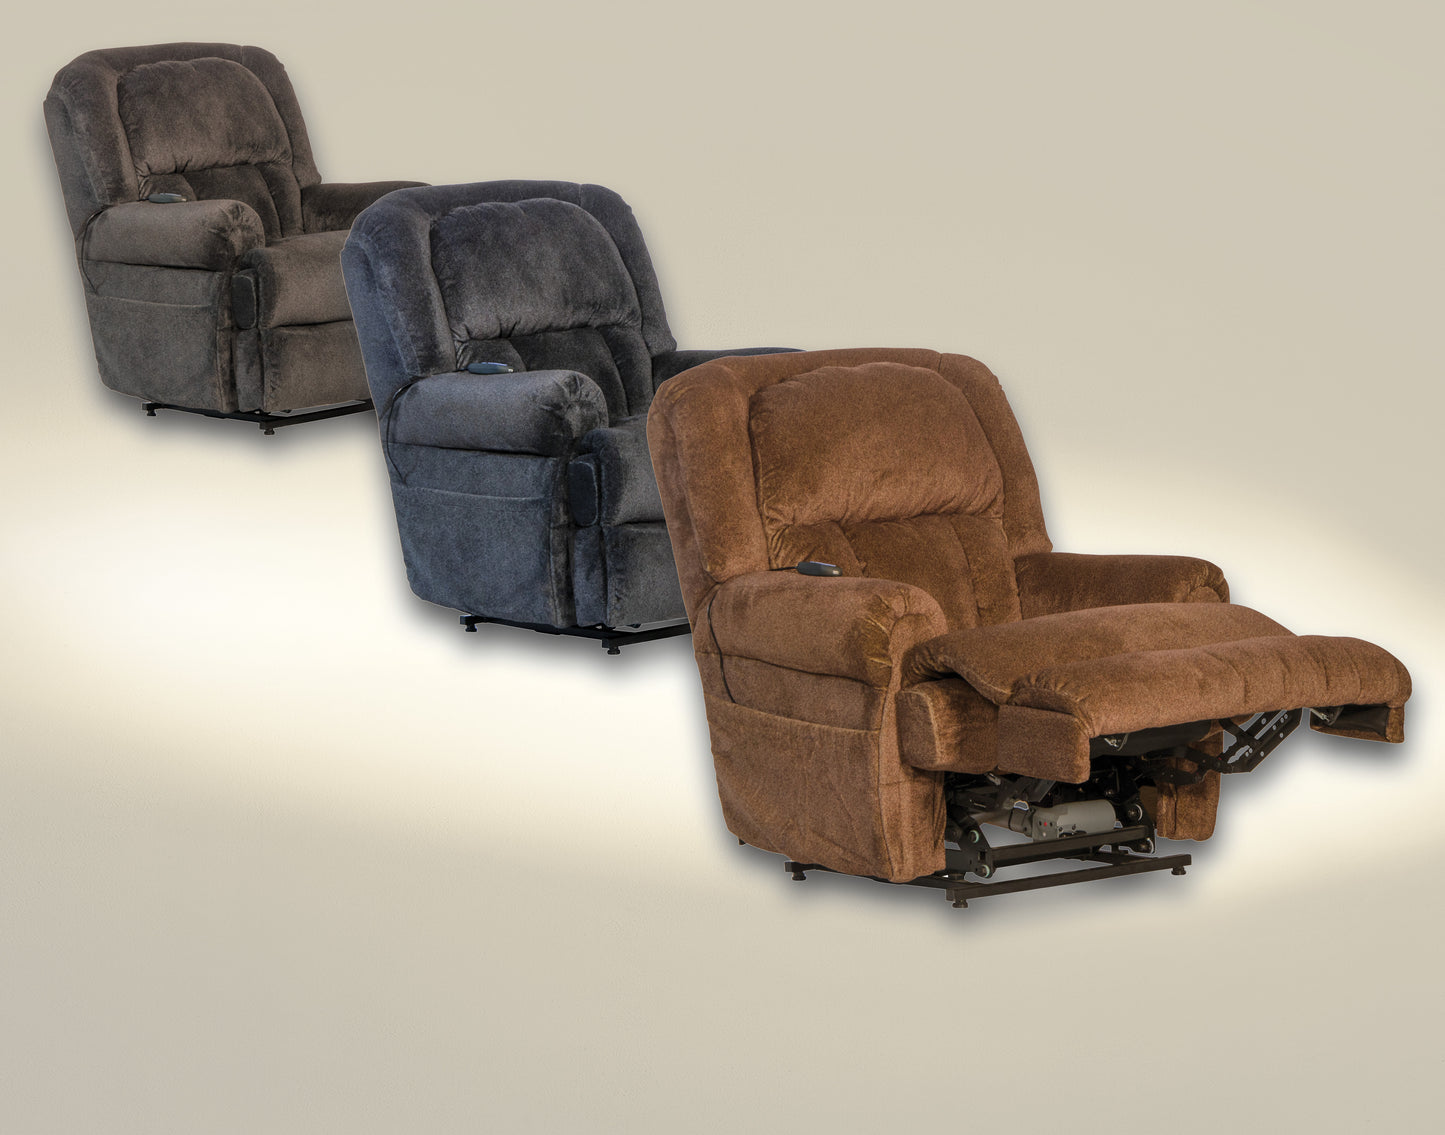 Burns Lift Chair - 3 different colors